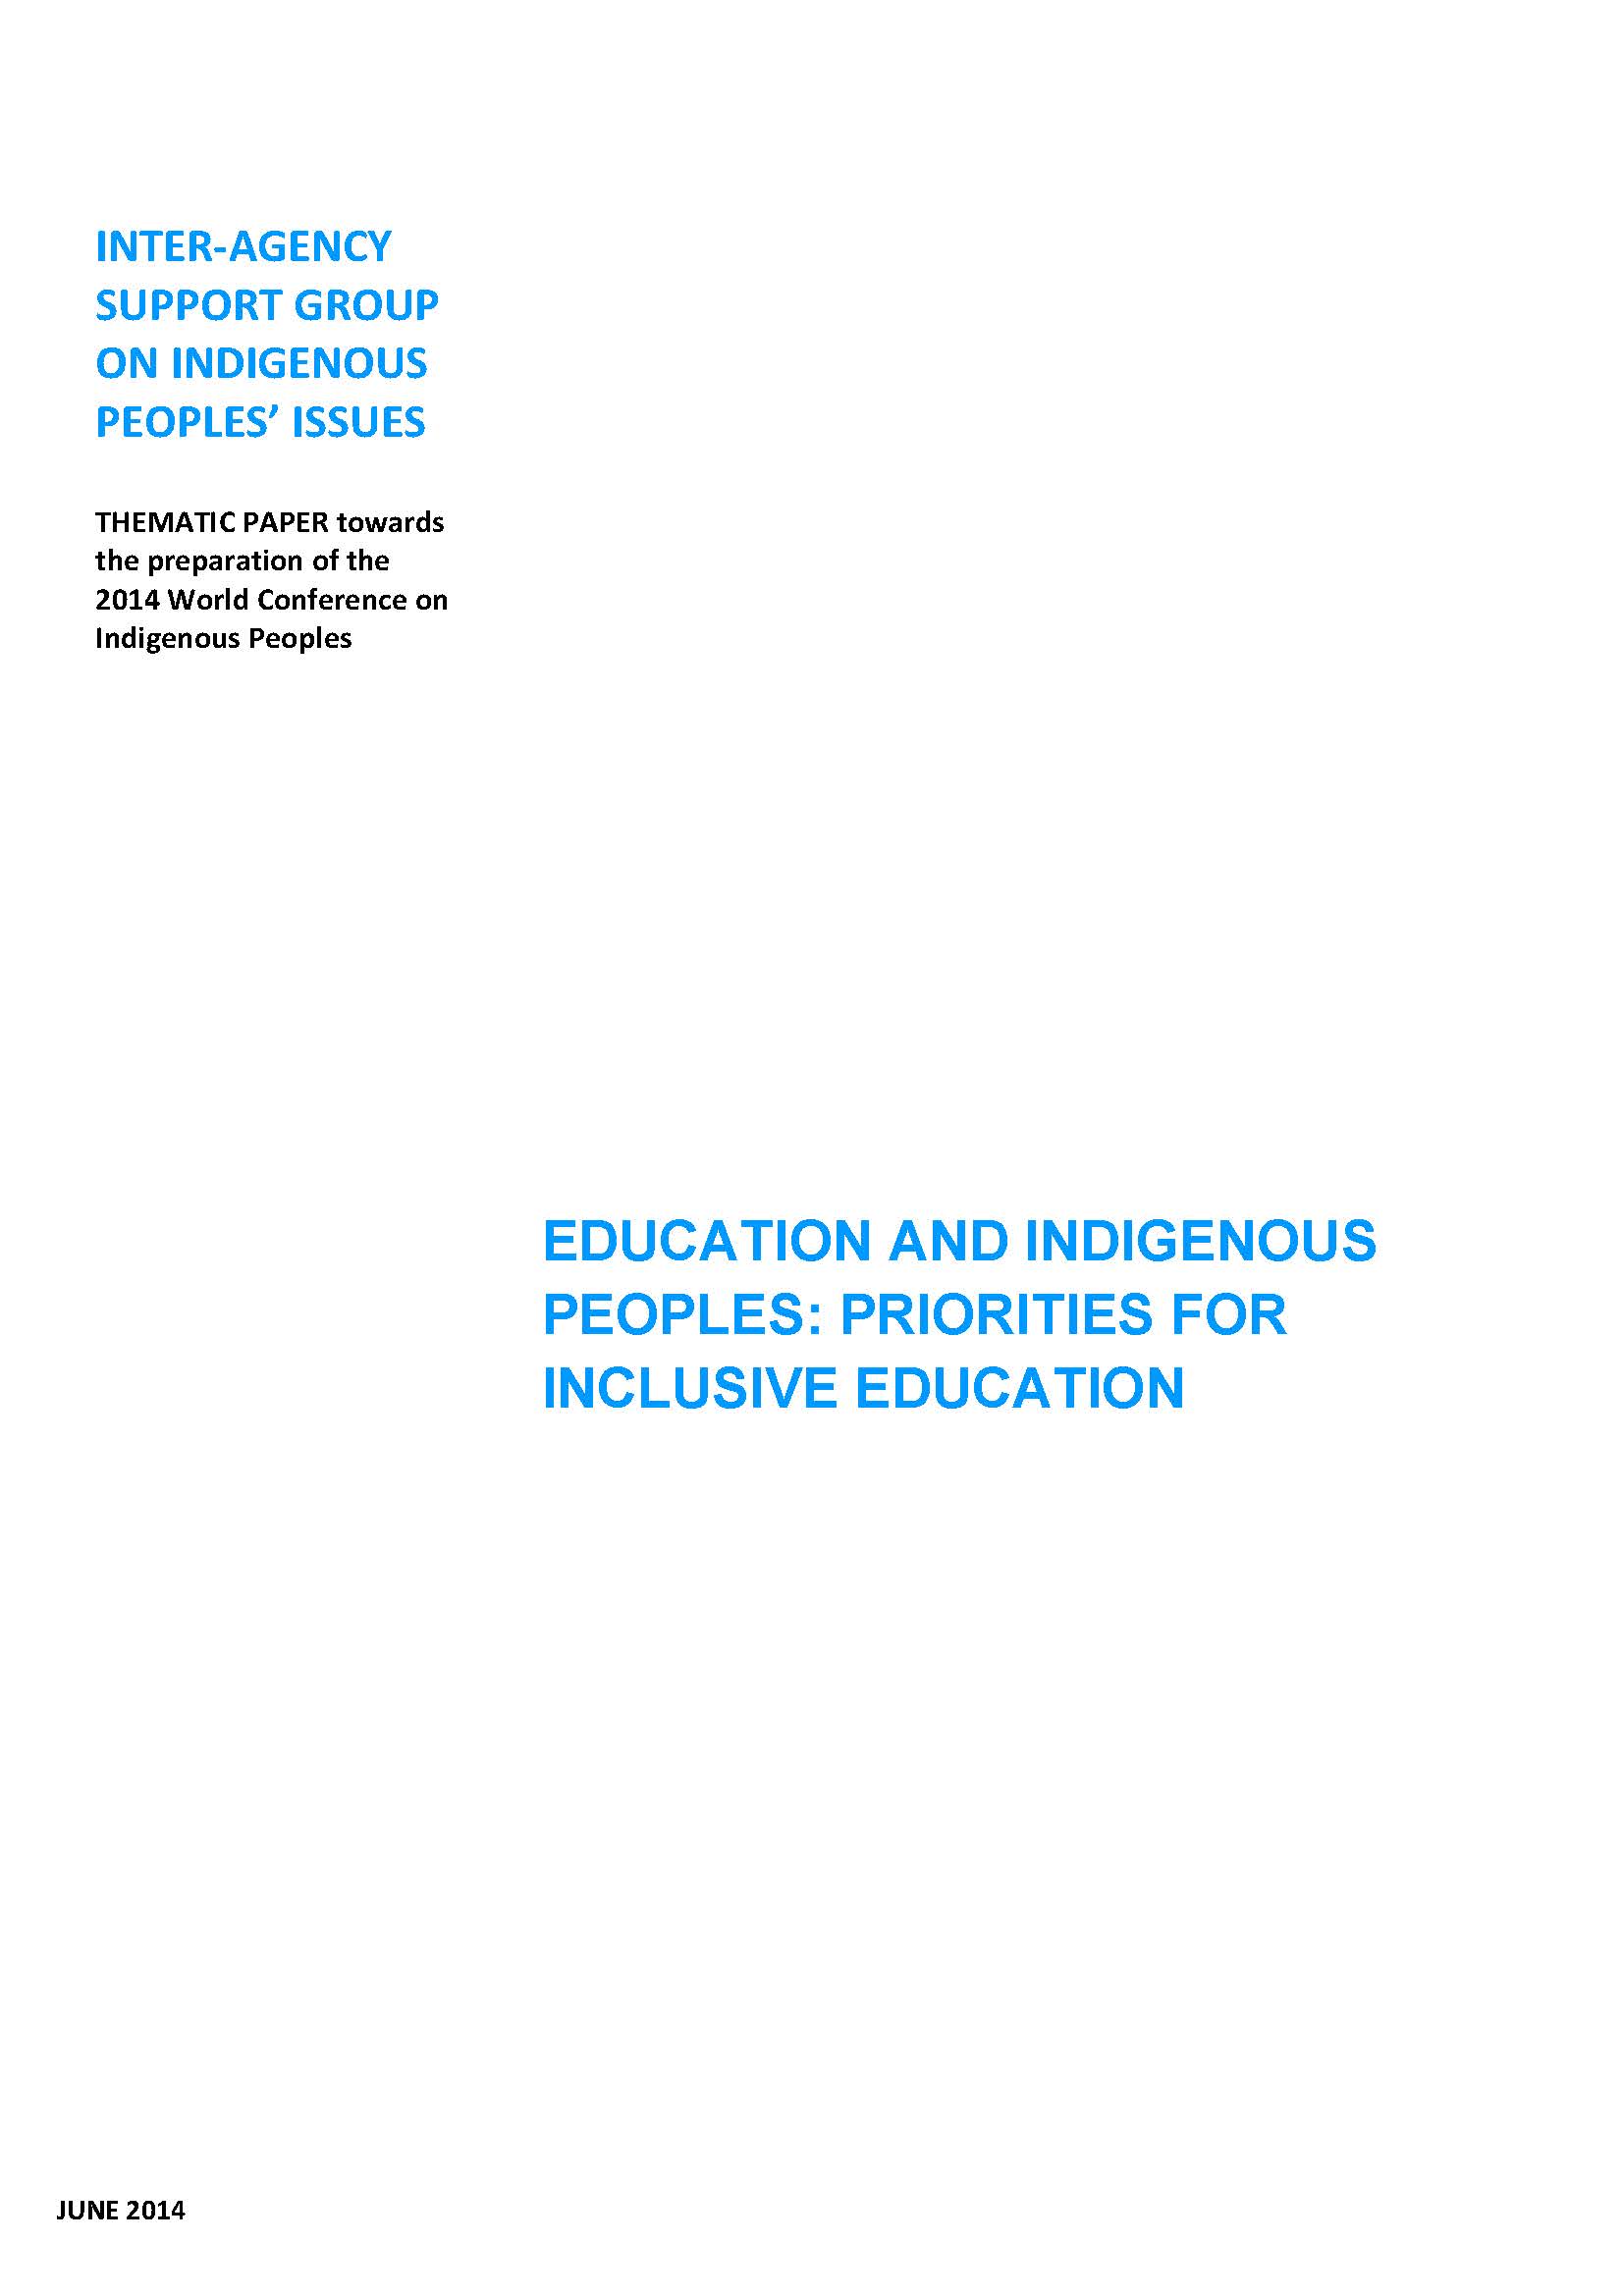 Thematic Paper on Education and Indigenous Peoples Priorities for Inclusive Education